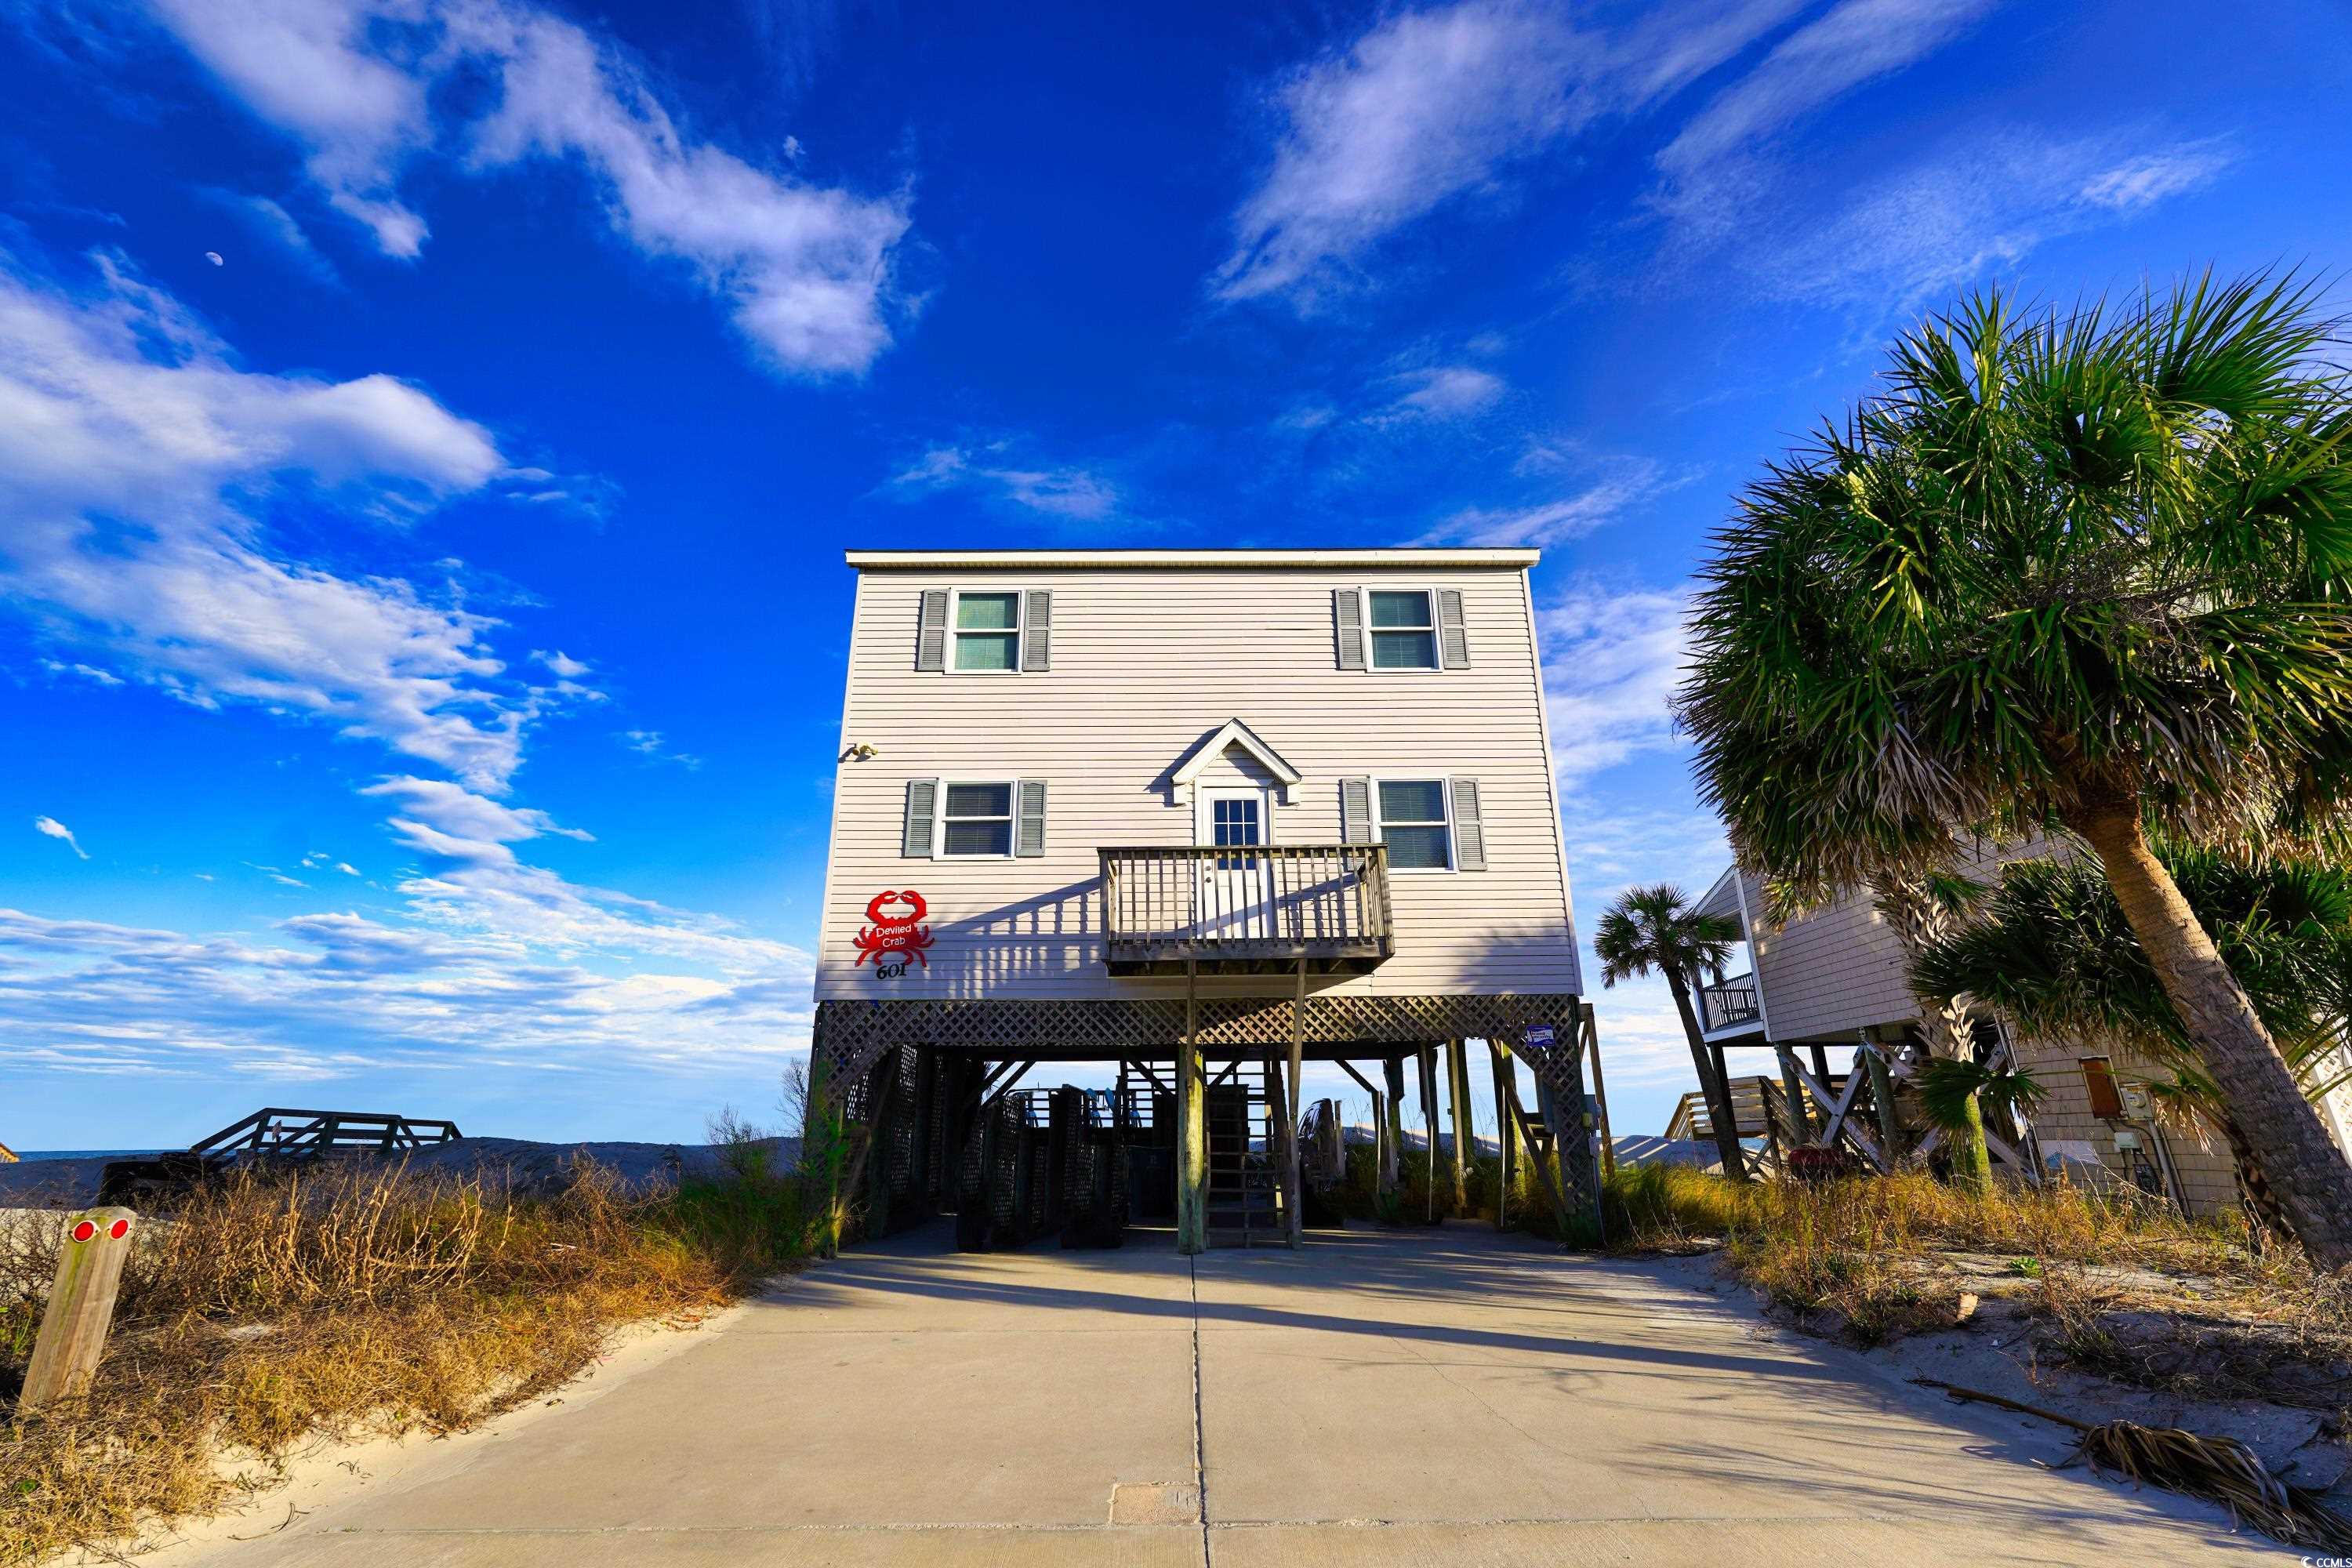 if you are looking for a beachfront property close to shopping, dining, marinas, the pier, and more, look no further! 601 s. waccamaw drive is a four-bedroom, two-and-a-half-bath home with spectacular views. the main floor offers living, dining, kitchen, and a half bath. additionally, there is access to a screened porch and open-air deck. upstairs, there are four bedrooms, two full baths, and laundry. be sure to check out the walking video tour of this property!